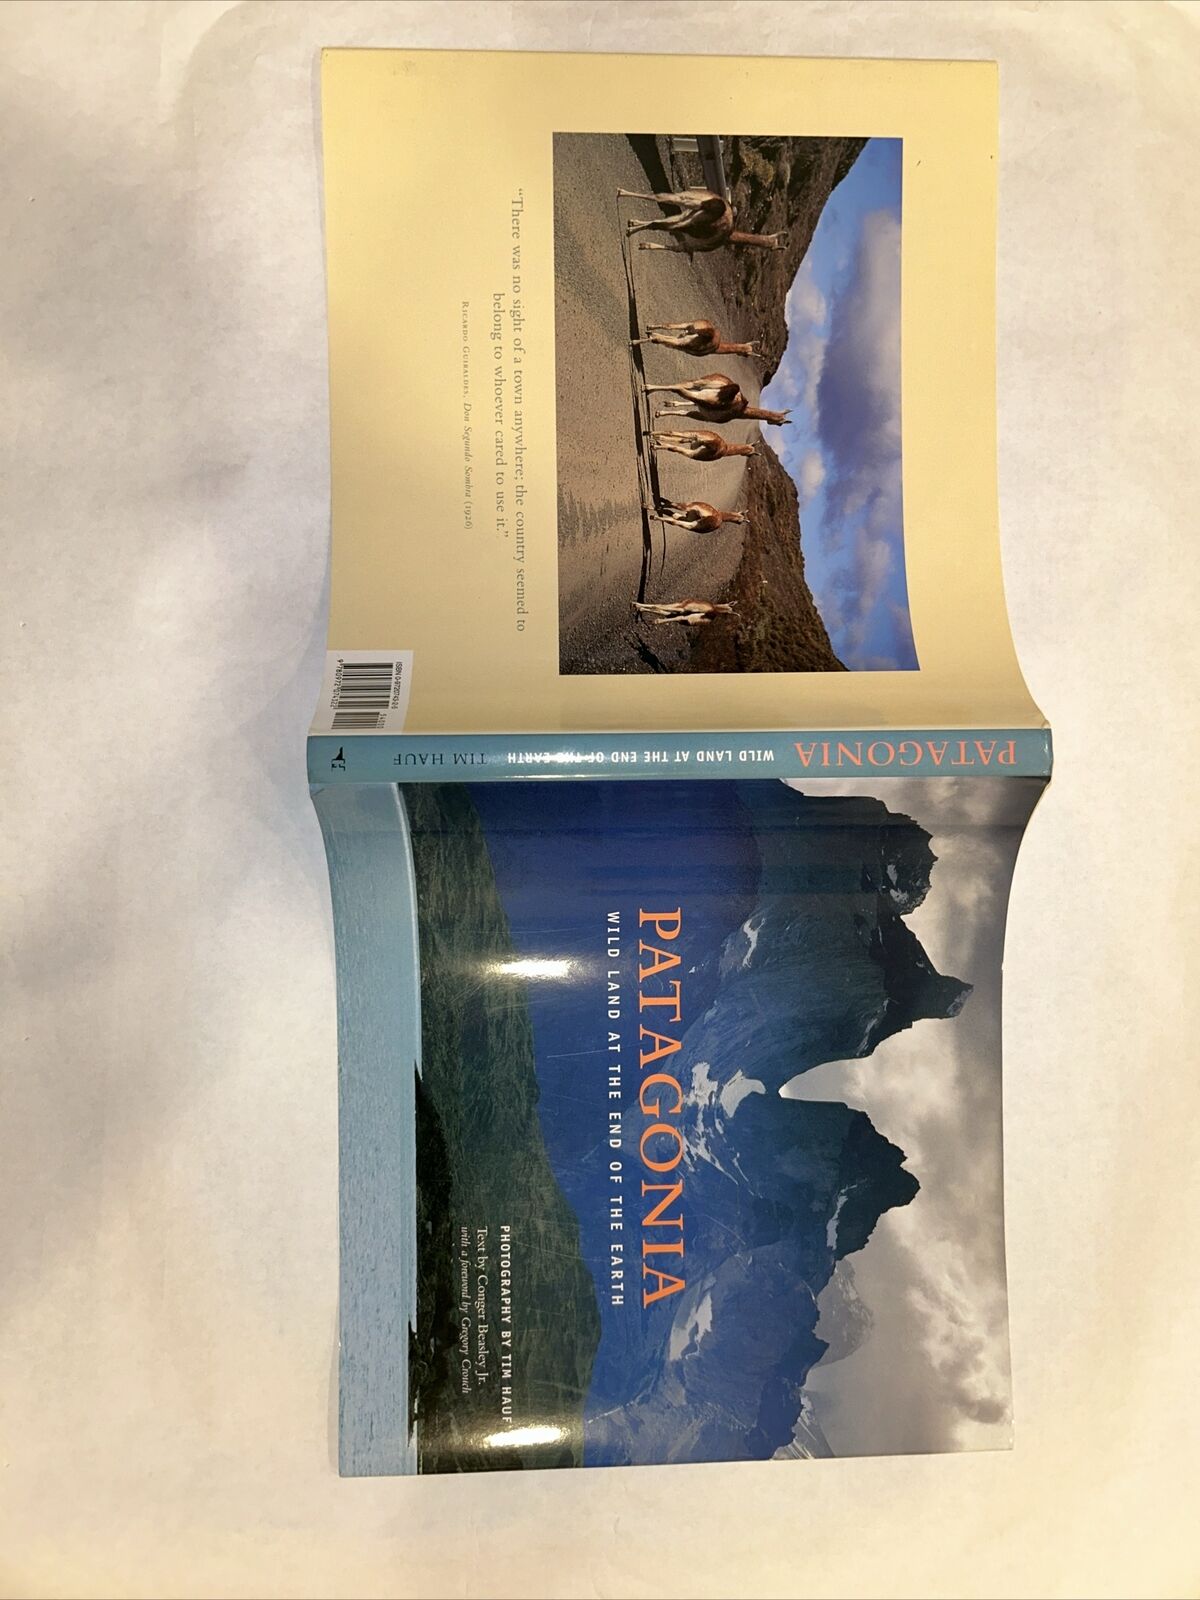 Patagonia Wild Land at the End of the Earth by Beasley Conger Coffee Book Advntr